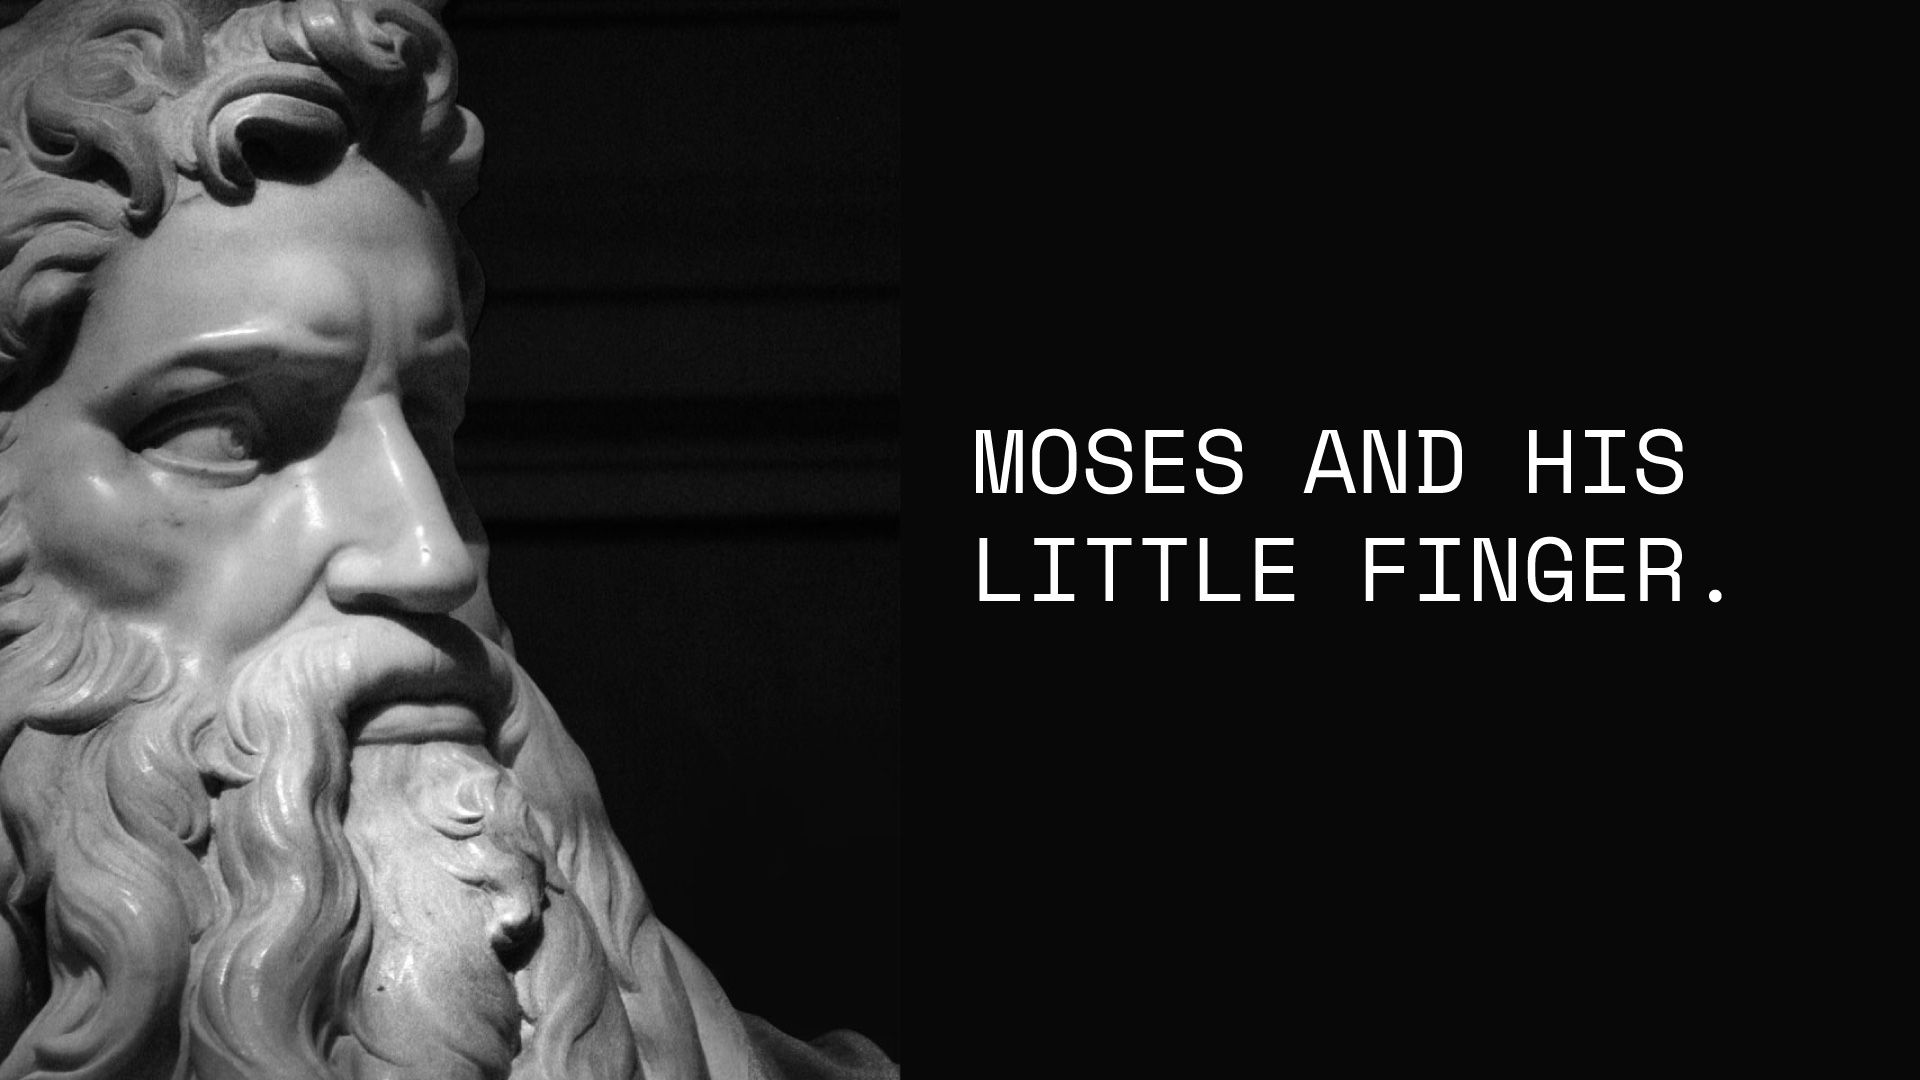 Michelangelo's Moses and his little finger